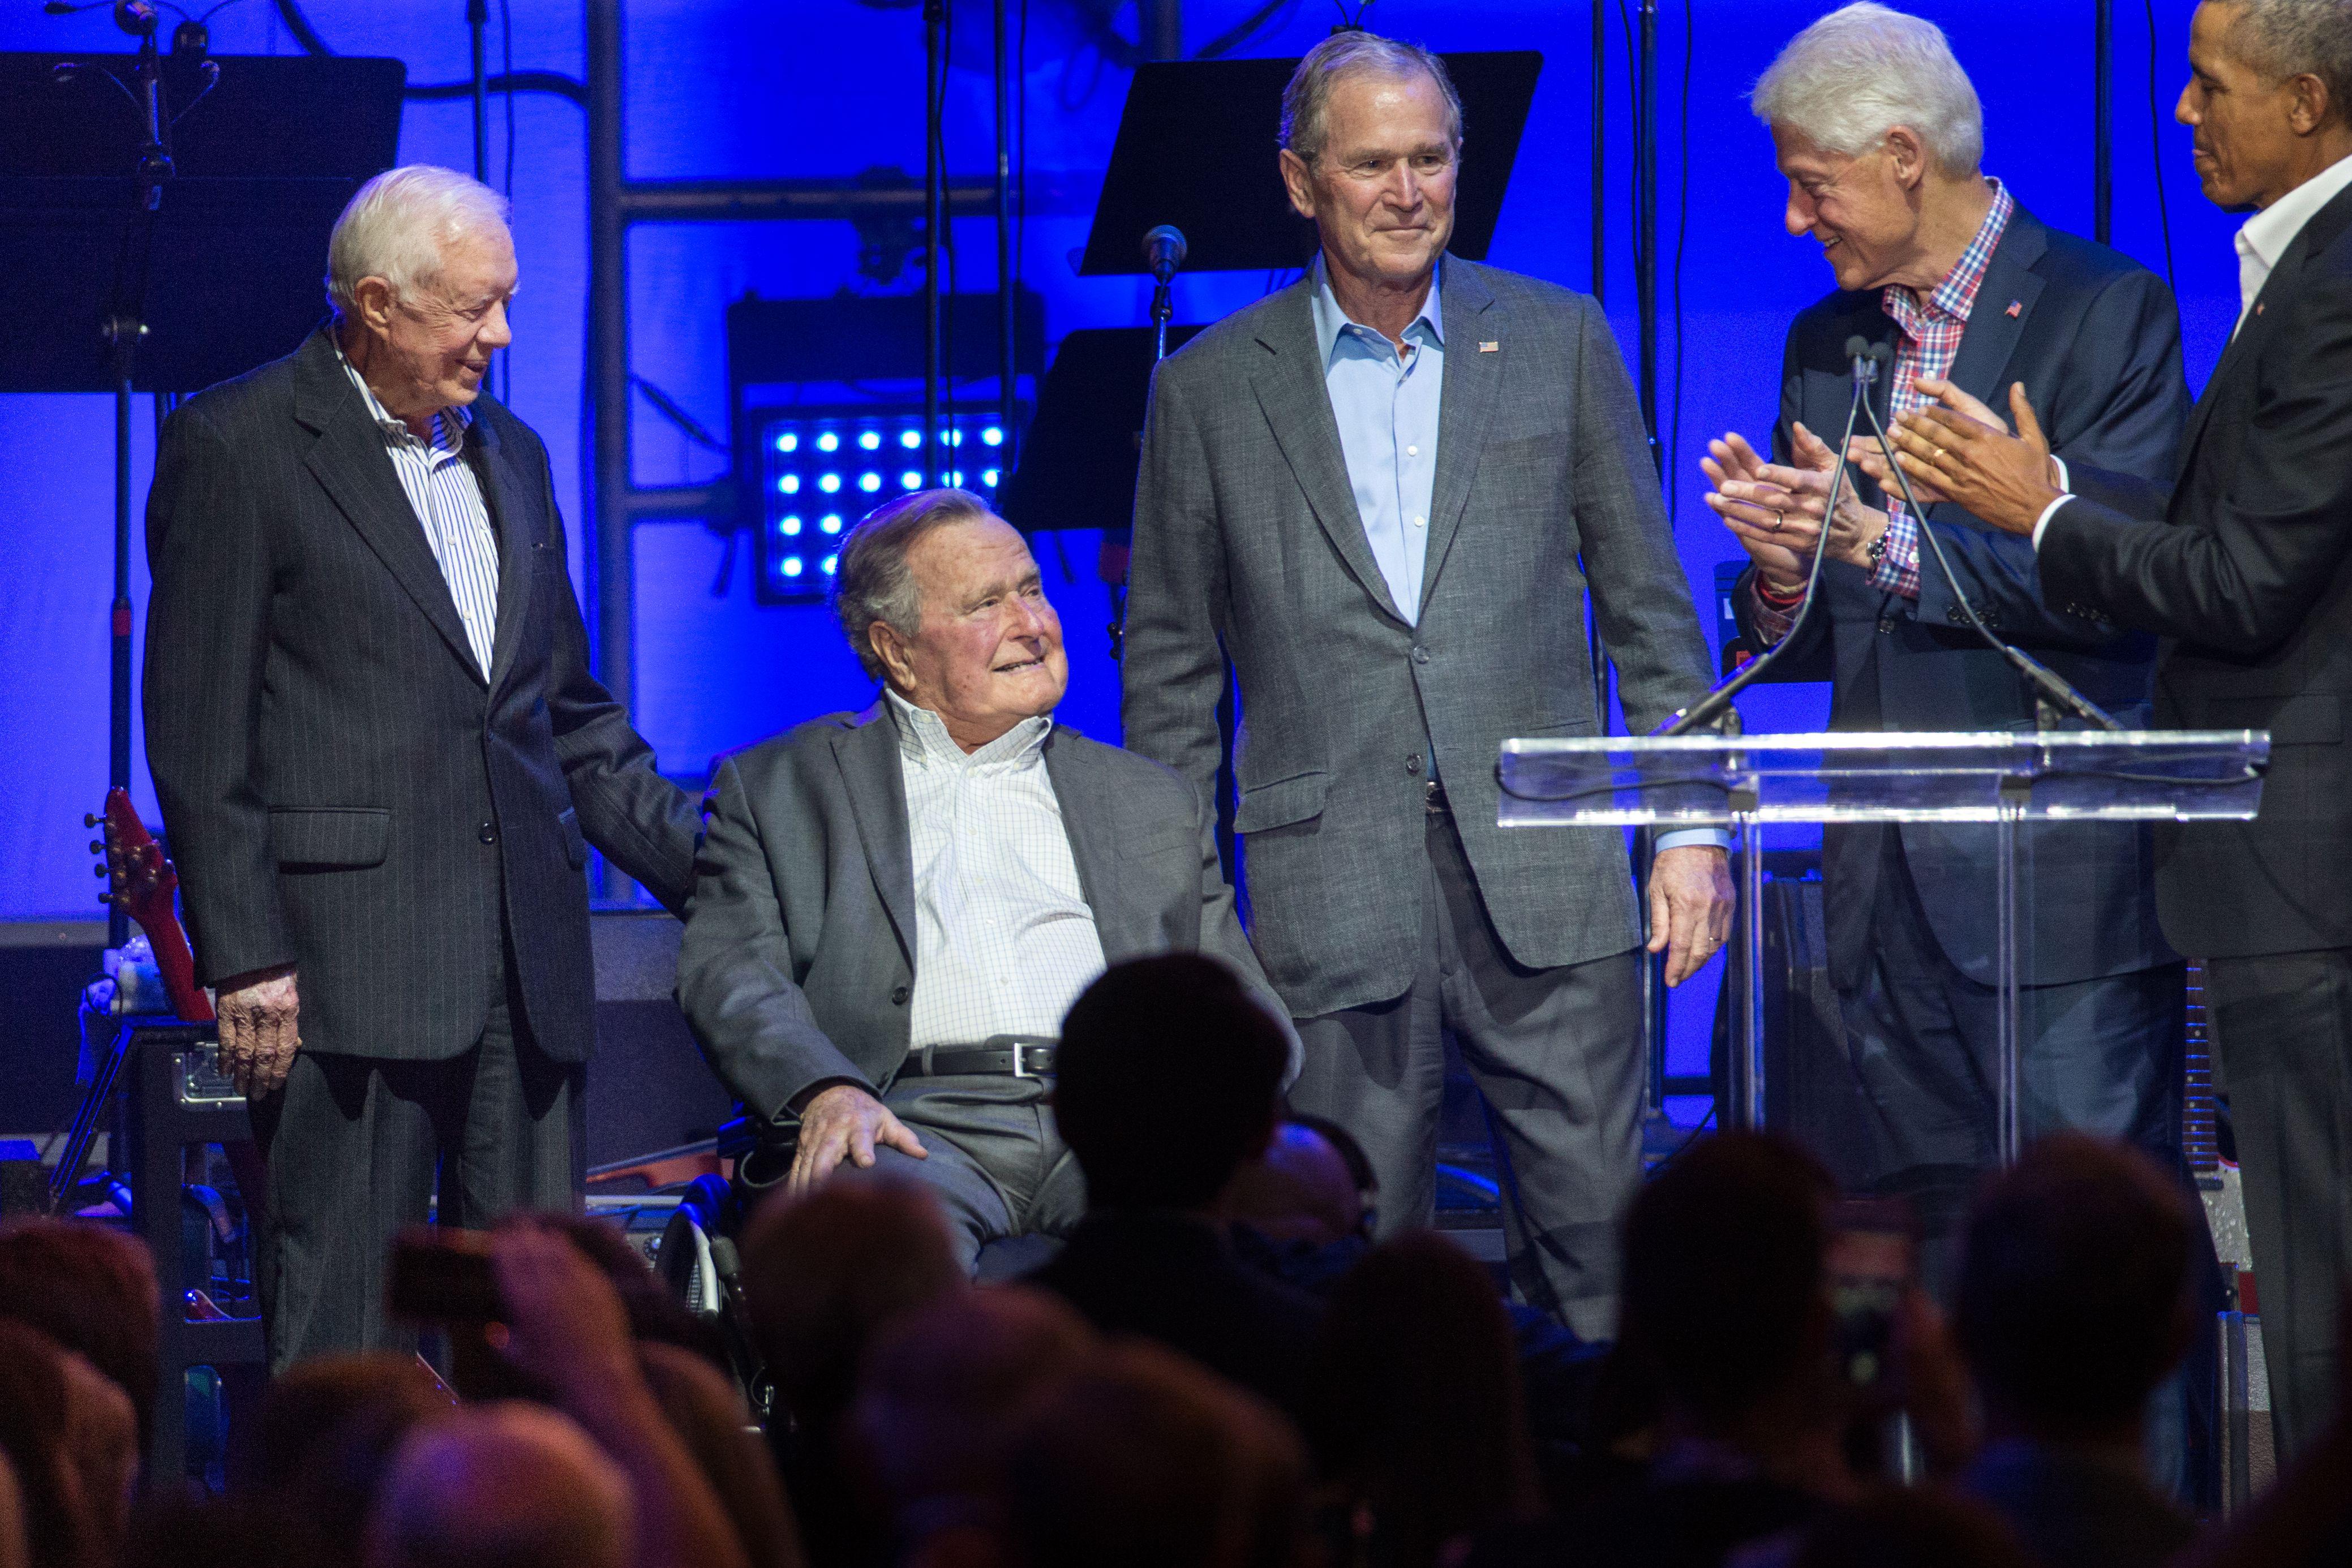 Jimmy Carter looks down toward George H. W. Bush and smiles on his left. To his right, his son George stands and smiles. To his left, Obama and Clinton applaud. They are all standing on a stage set up for a concert.